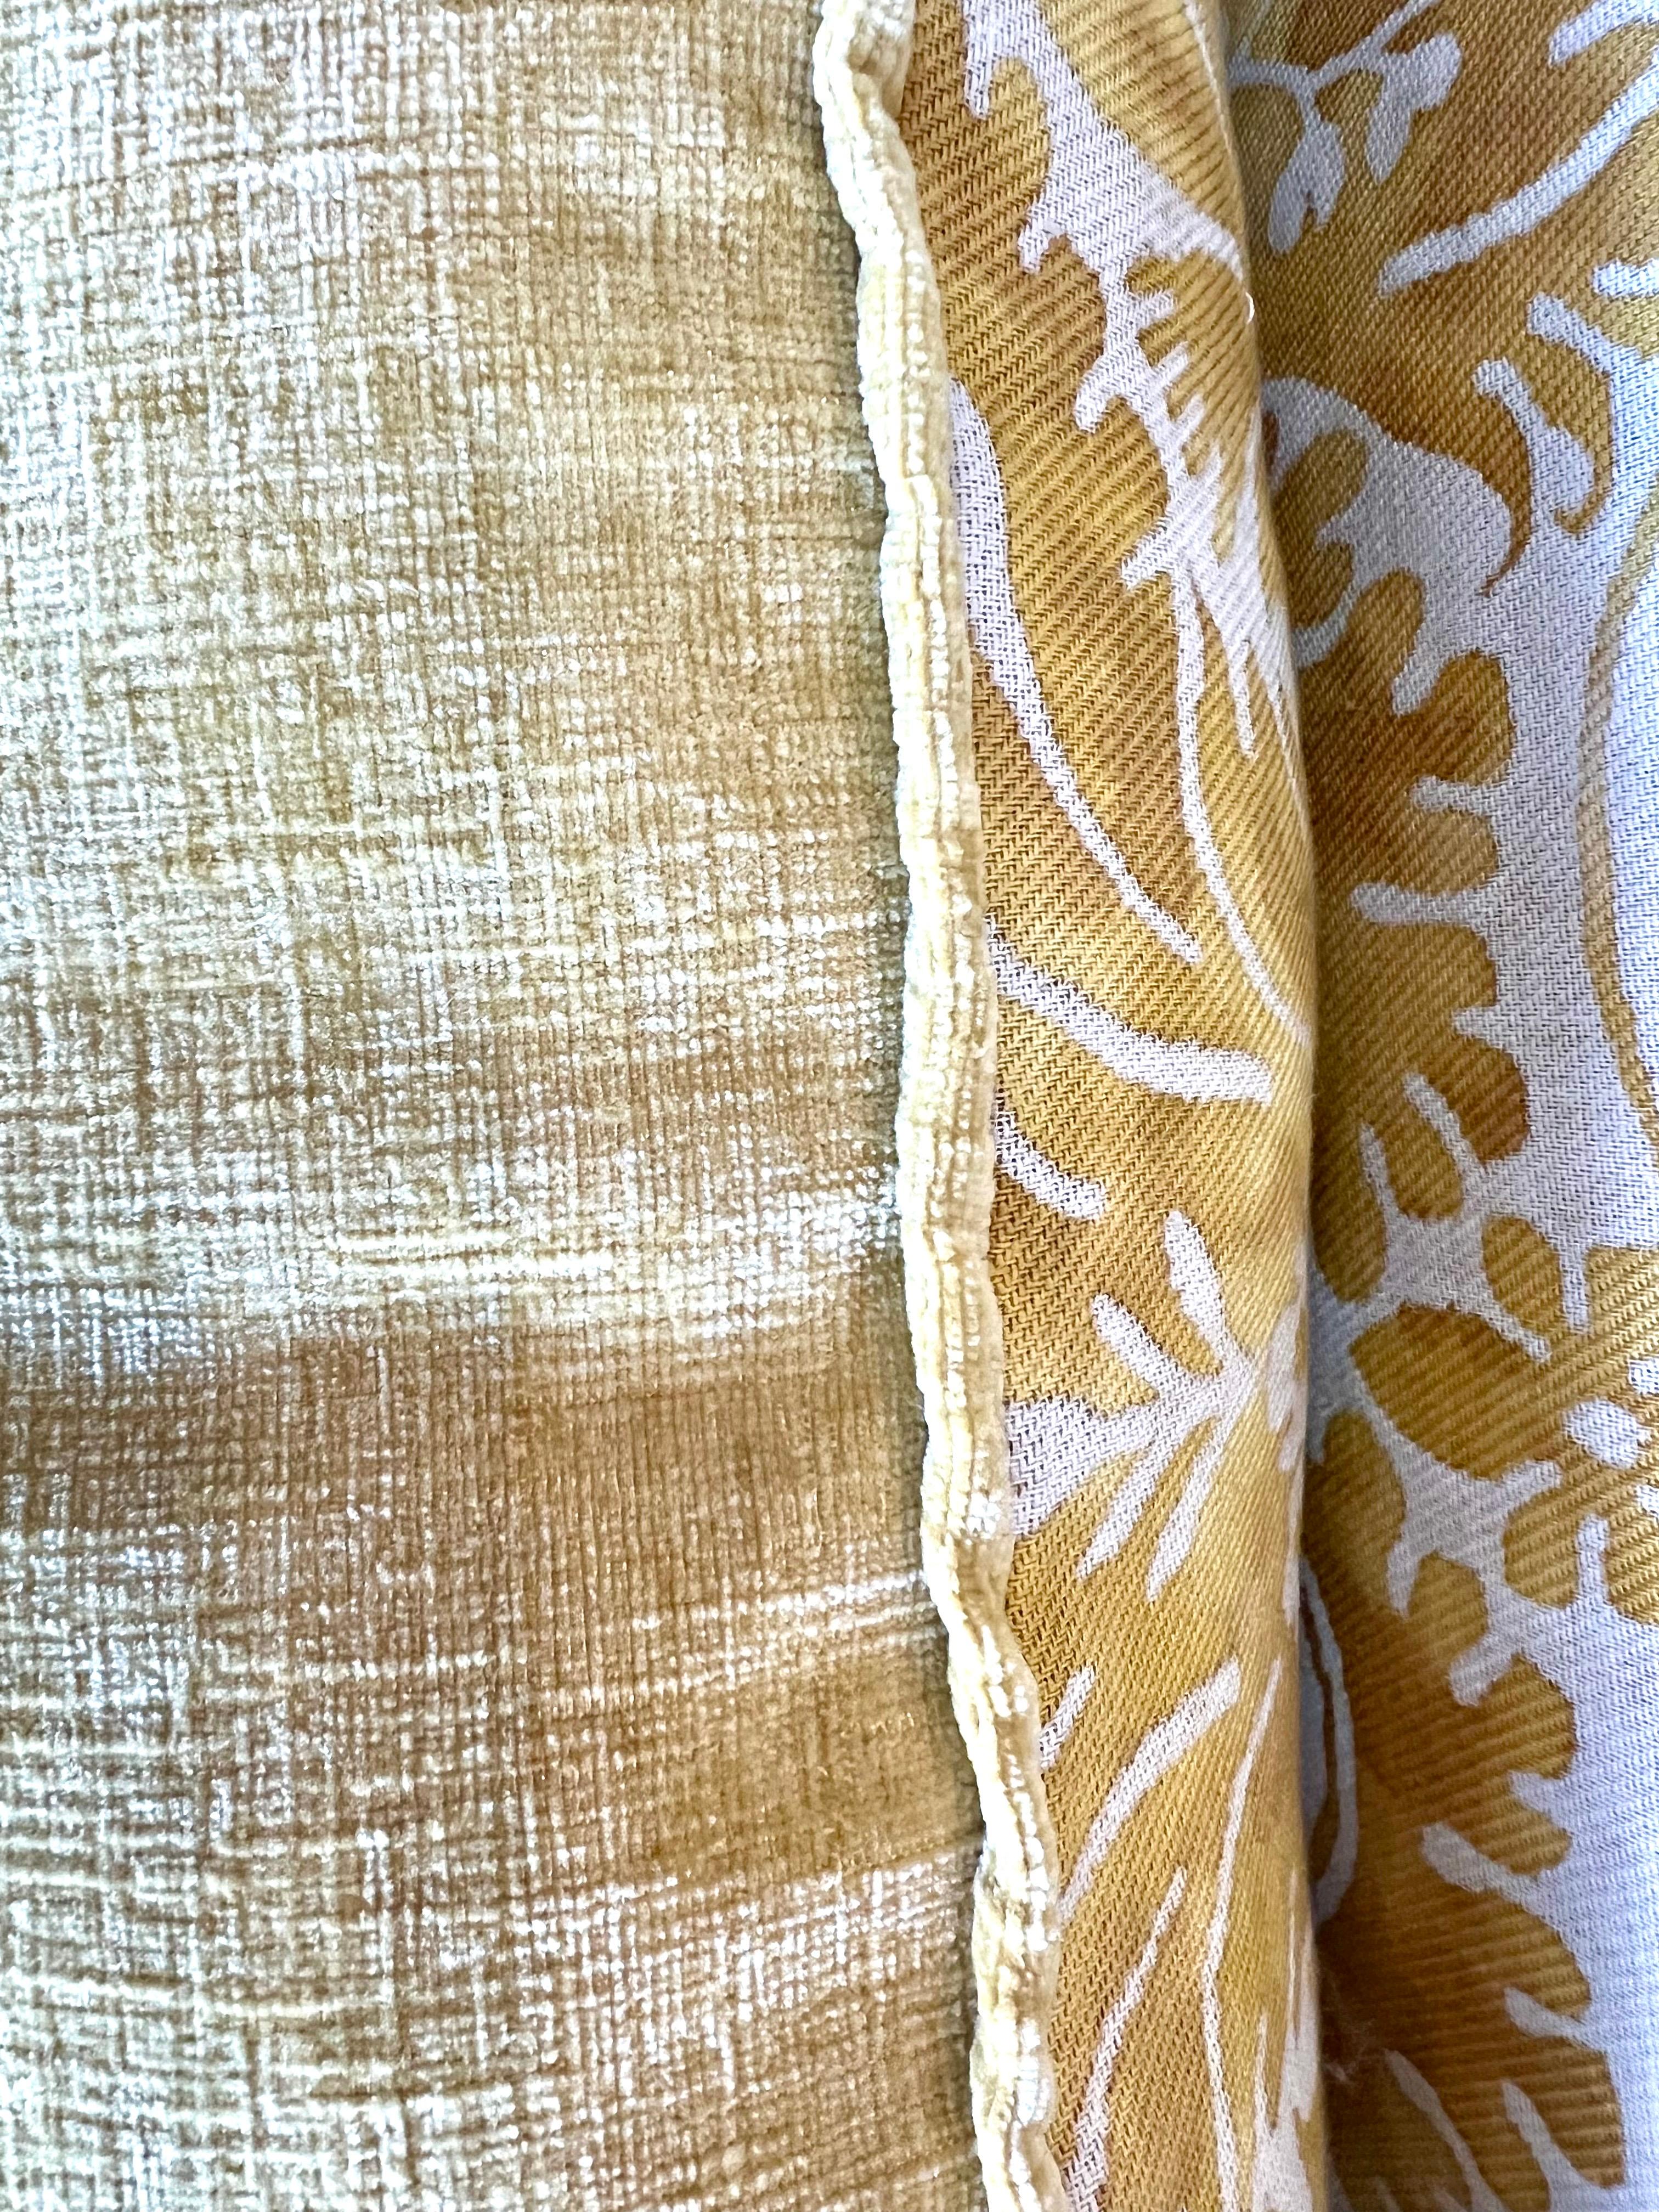 20th Century Pair of Yellow & White De Medici Patterned Fortuny Pillows For Sale